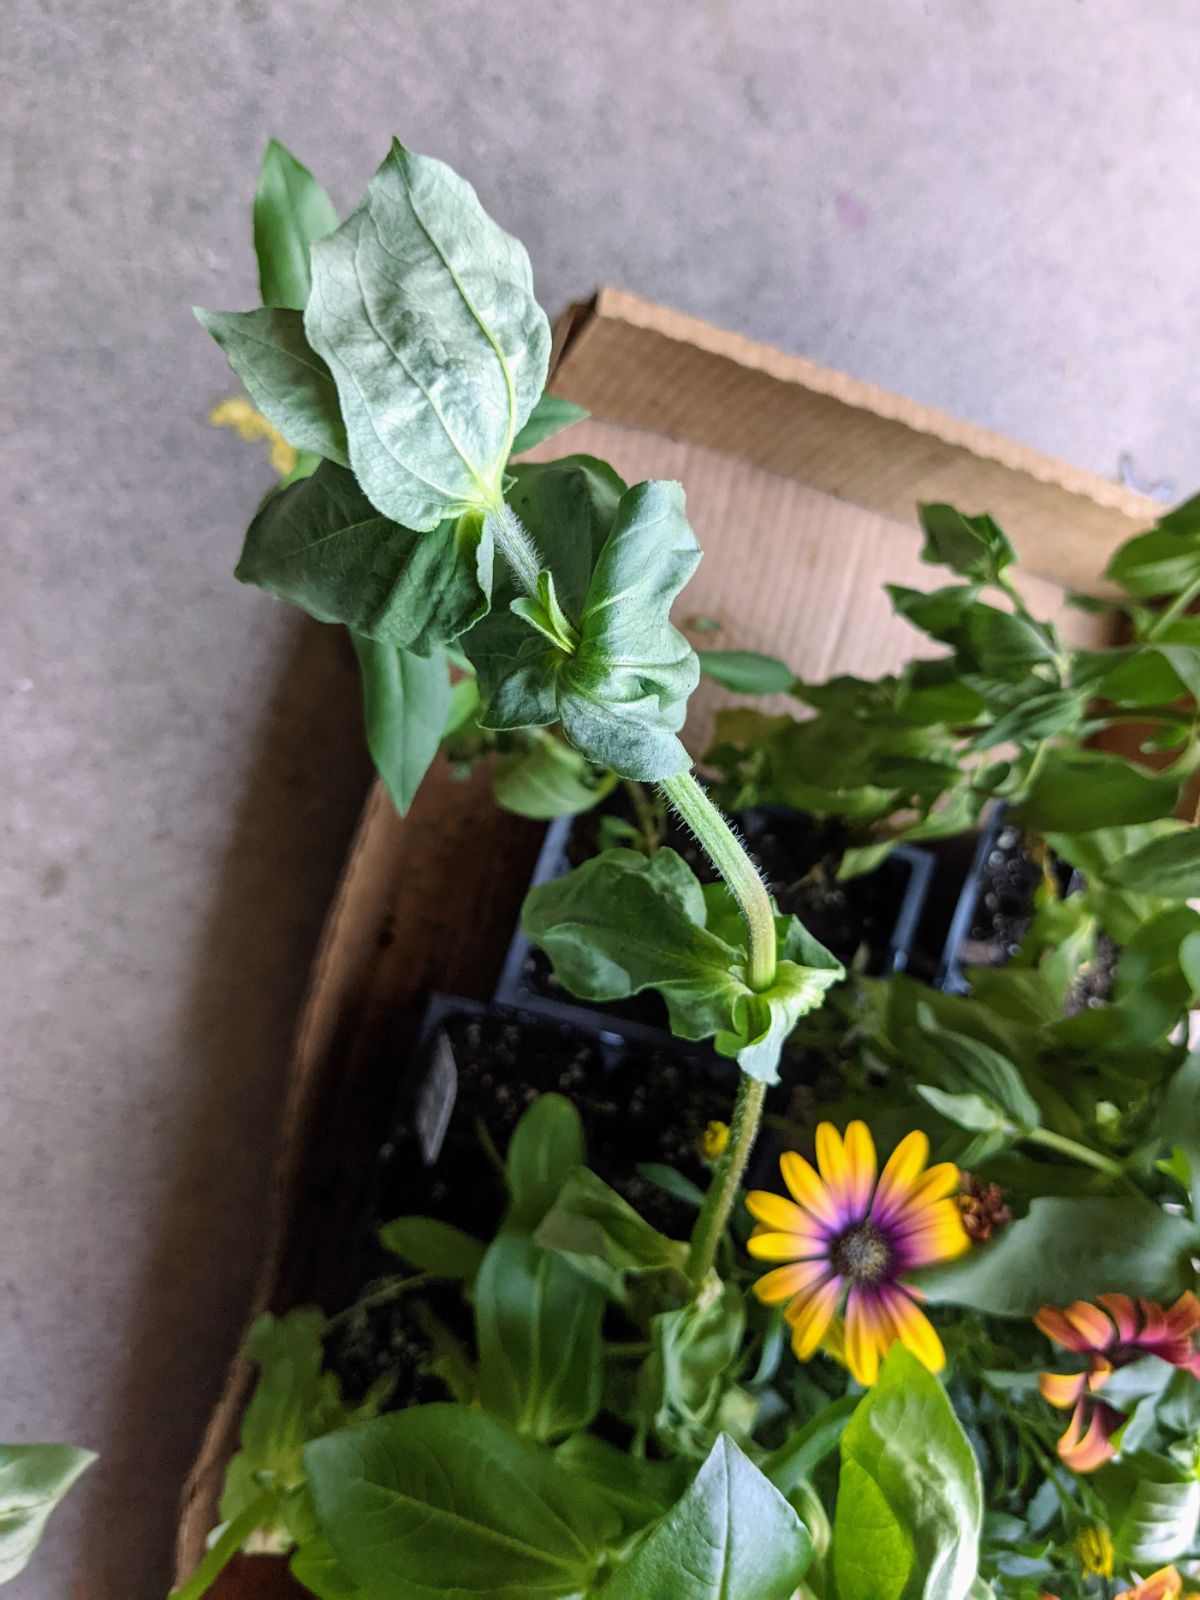 Wilting zinnia plant in a cardboard box with other flowers 